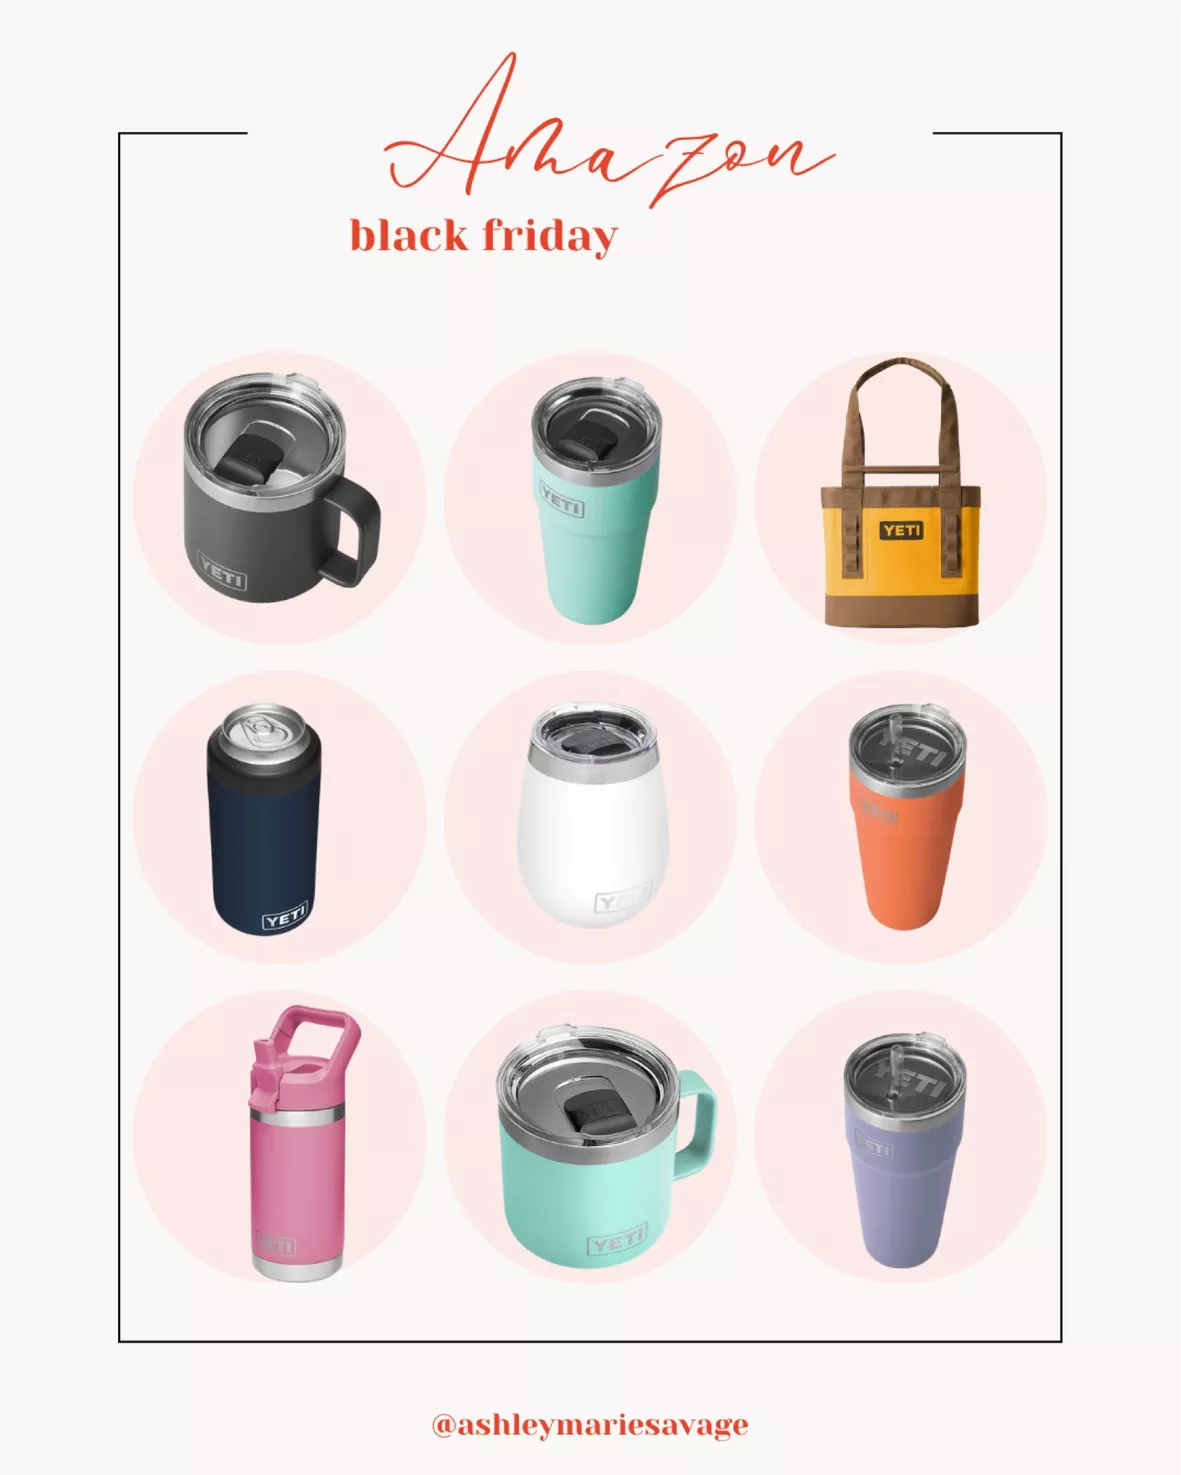 Buy a YETI cooler, get 2 free tumblers on Black Friday